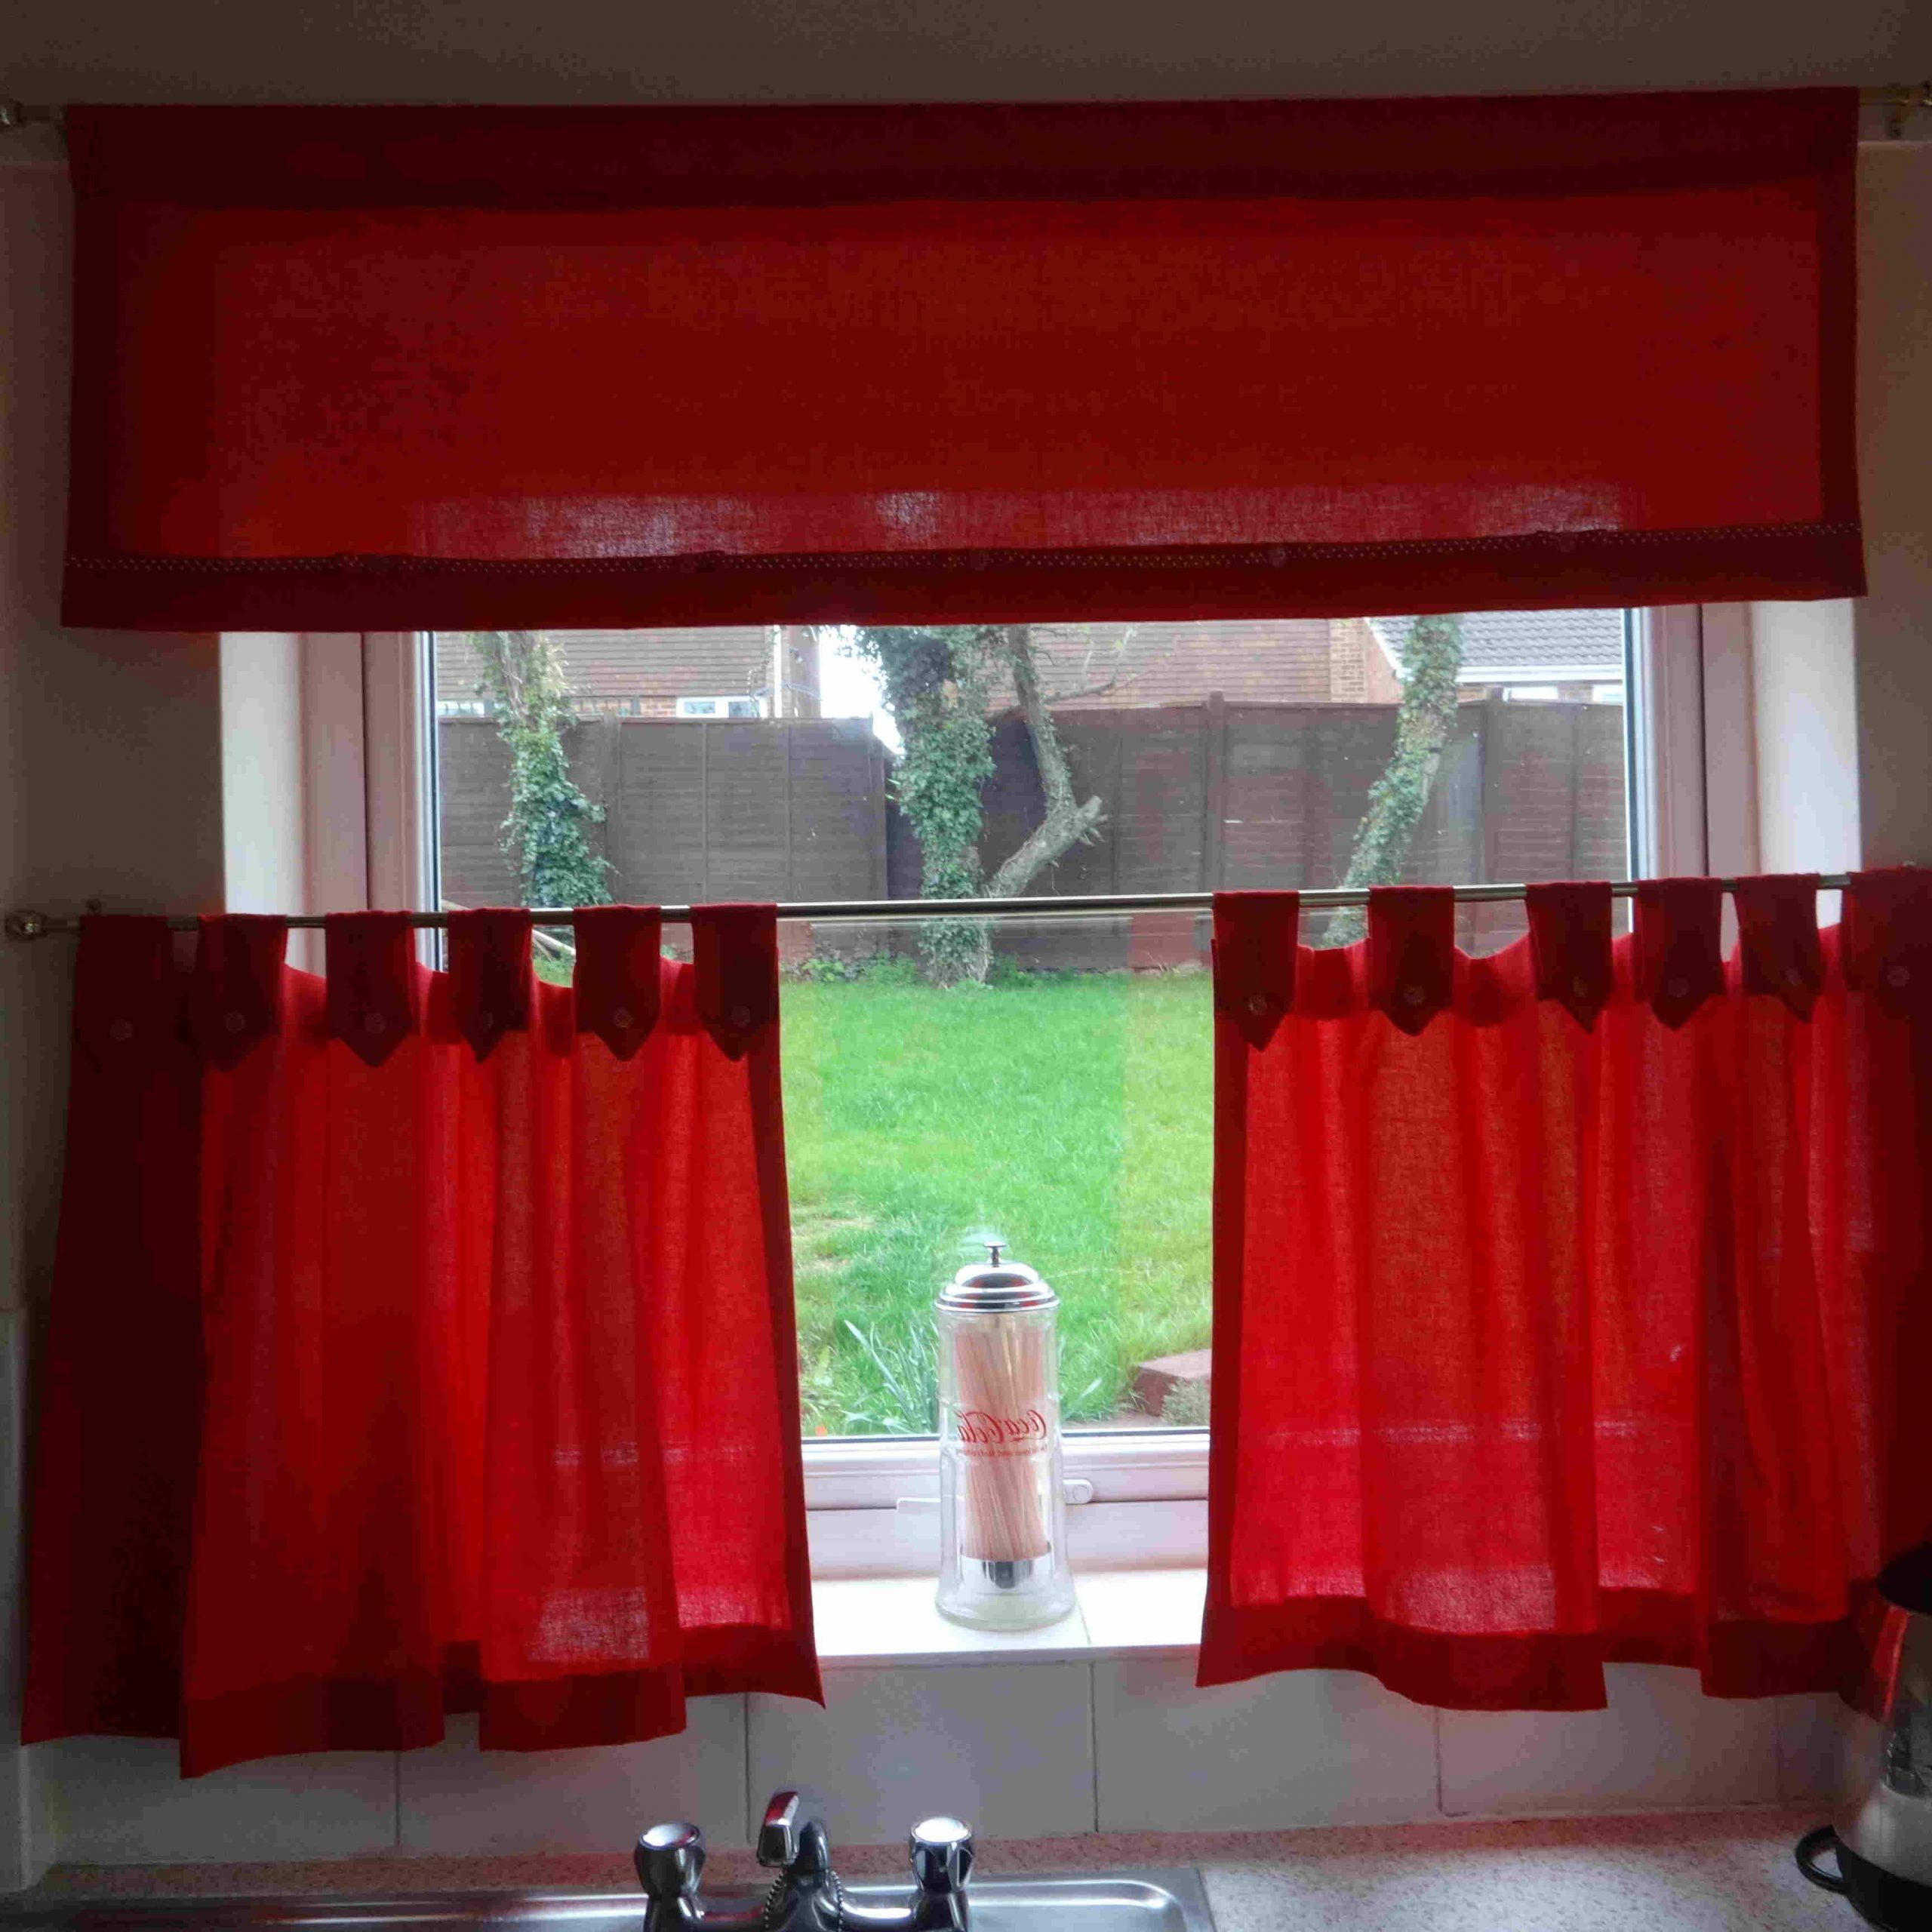 Trendy Modern Subtle Texture Solid Red Kitchen Curtains Inside Excellent Kitchen Valance Red Curtains Make Burlap For (View 9 of 20)